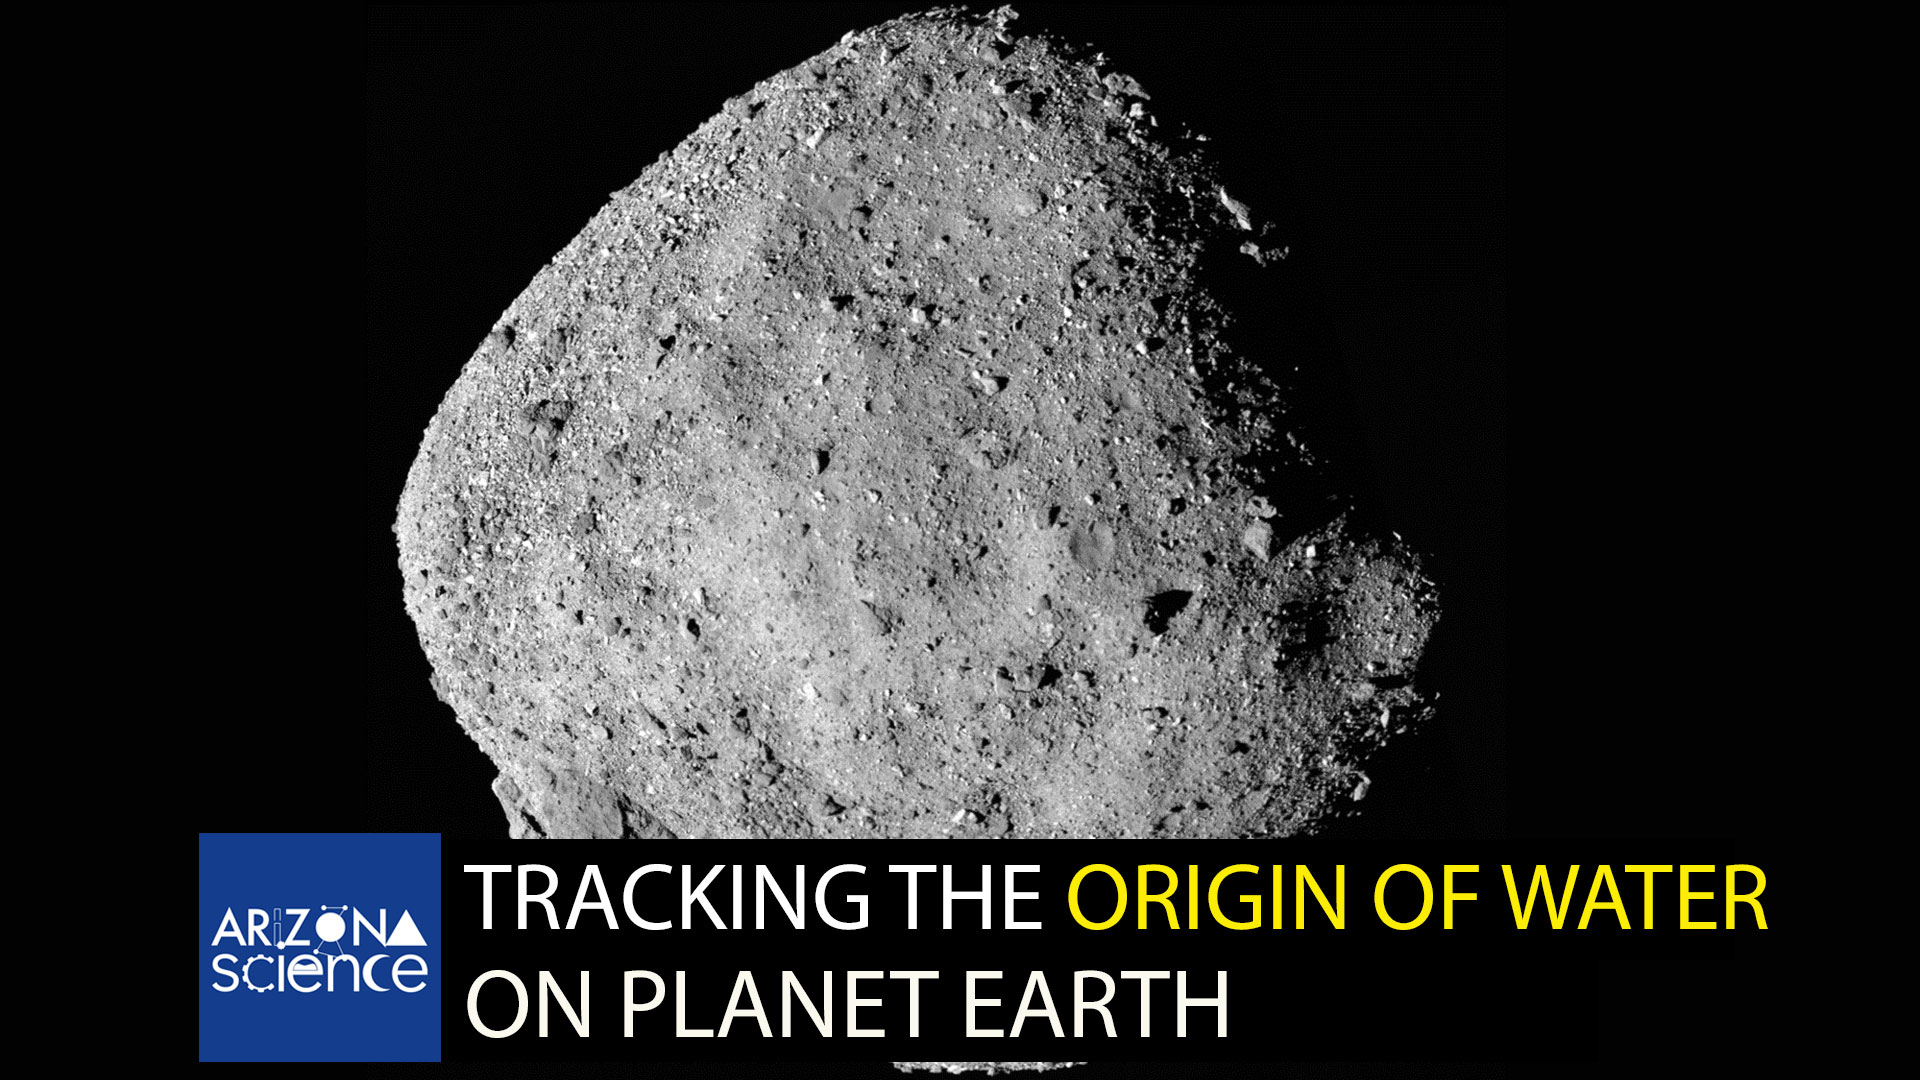 Water was discovered on the asteroid Bennu in 2018.